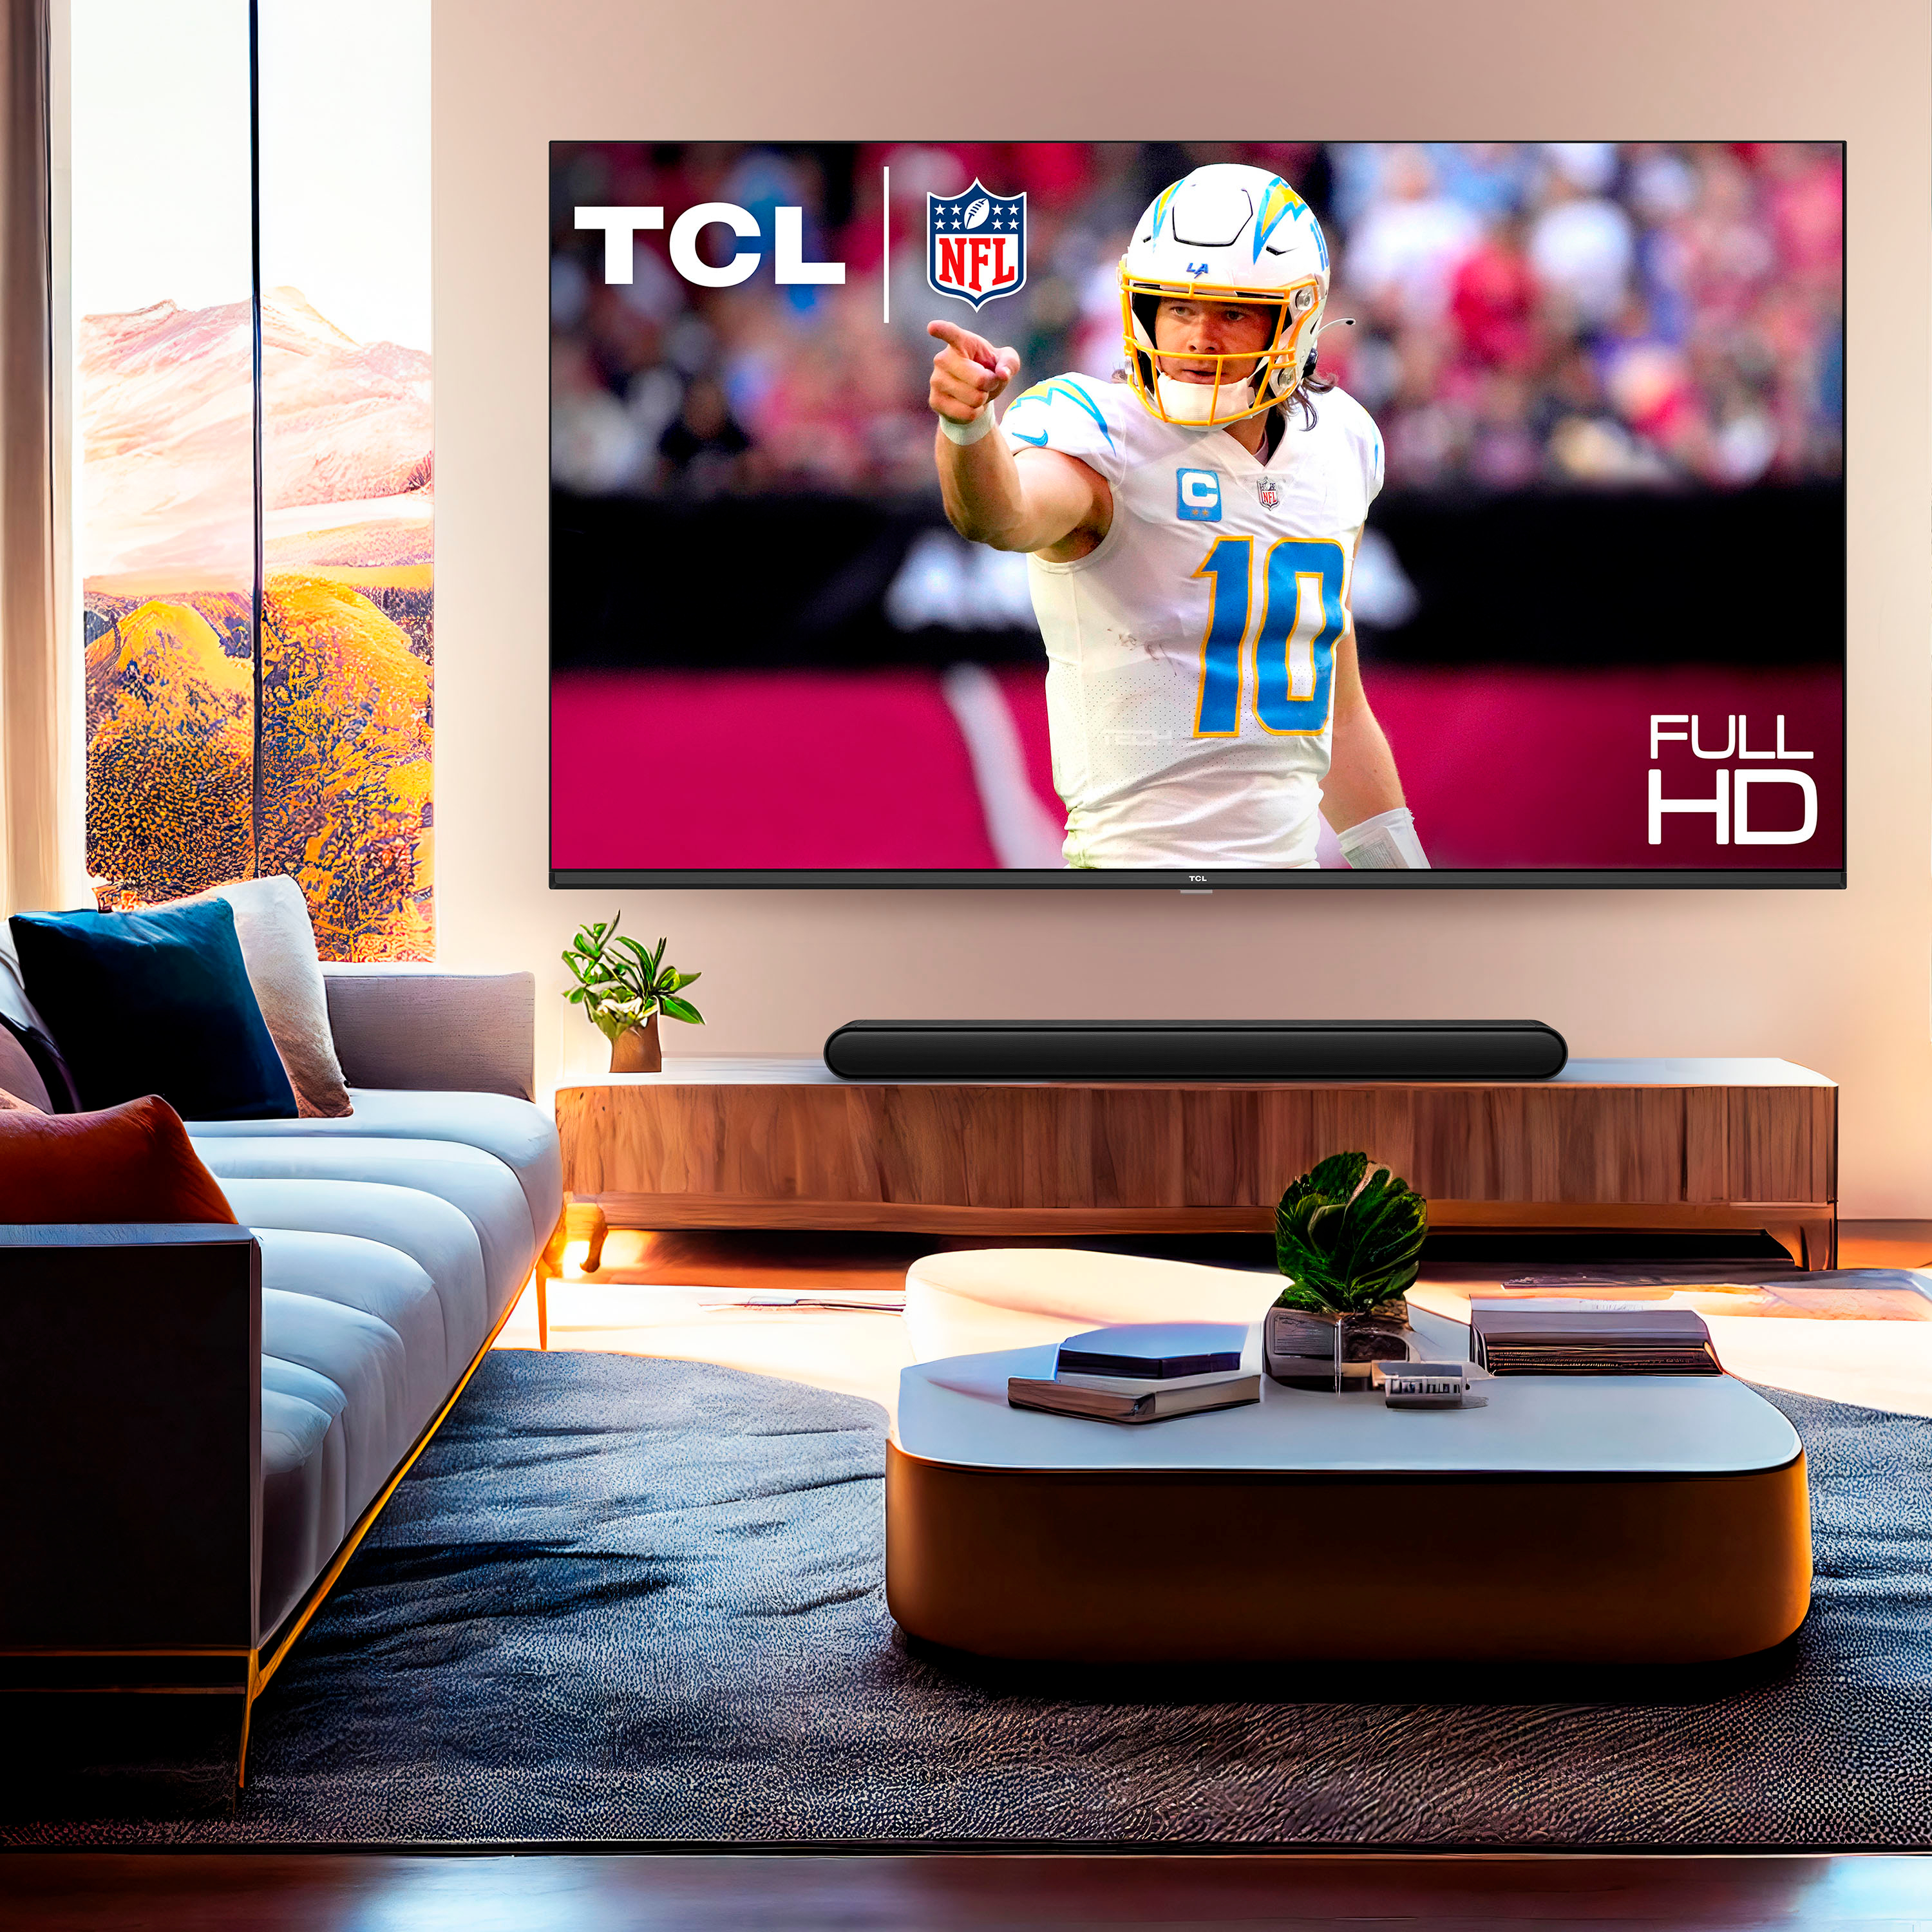 TCL 43 Q Class 4K QLED HDR Smart TV with Fire TV - 43Q570F